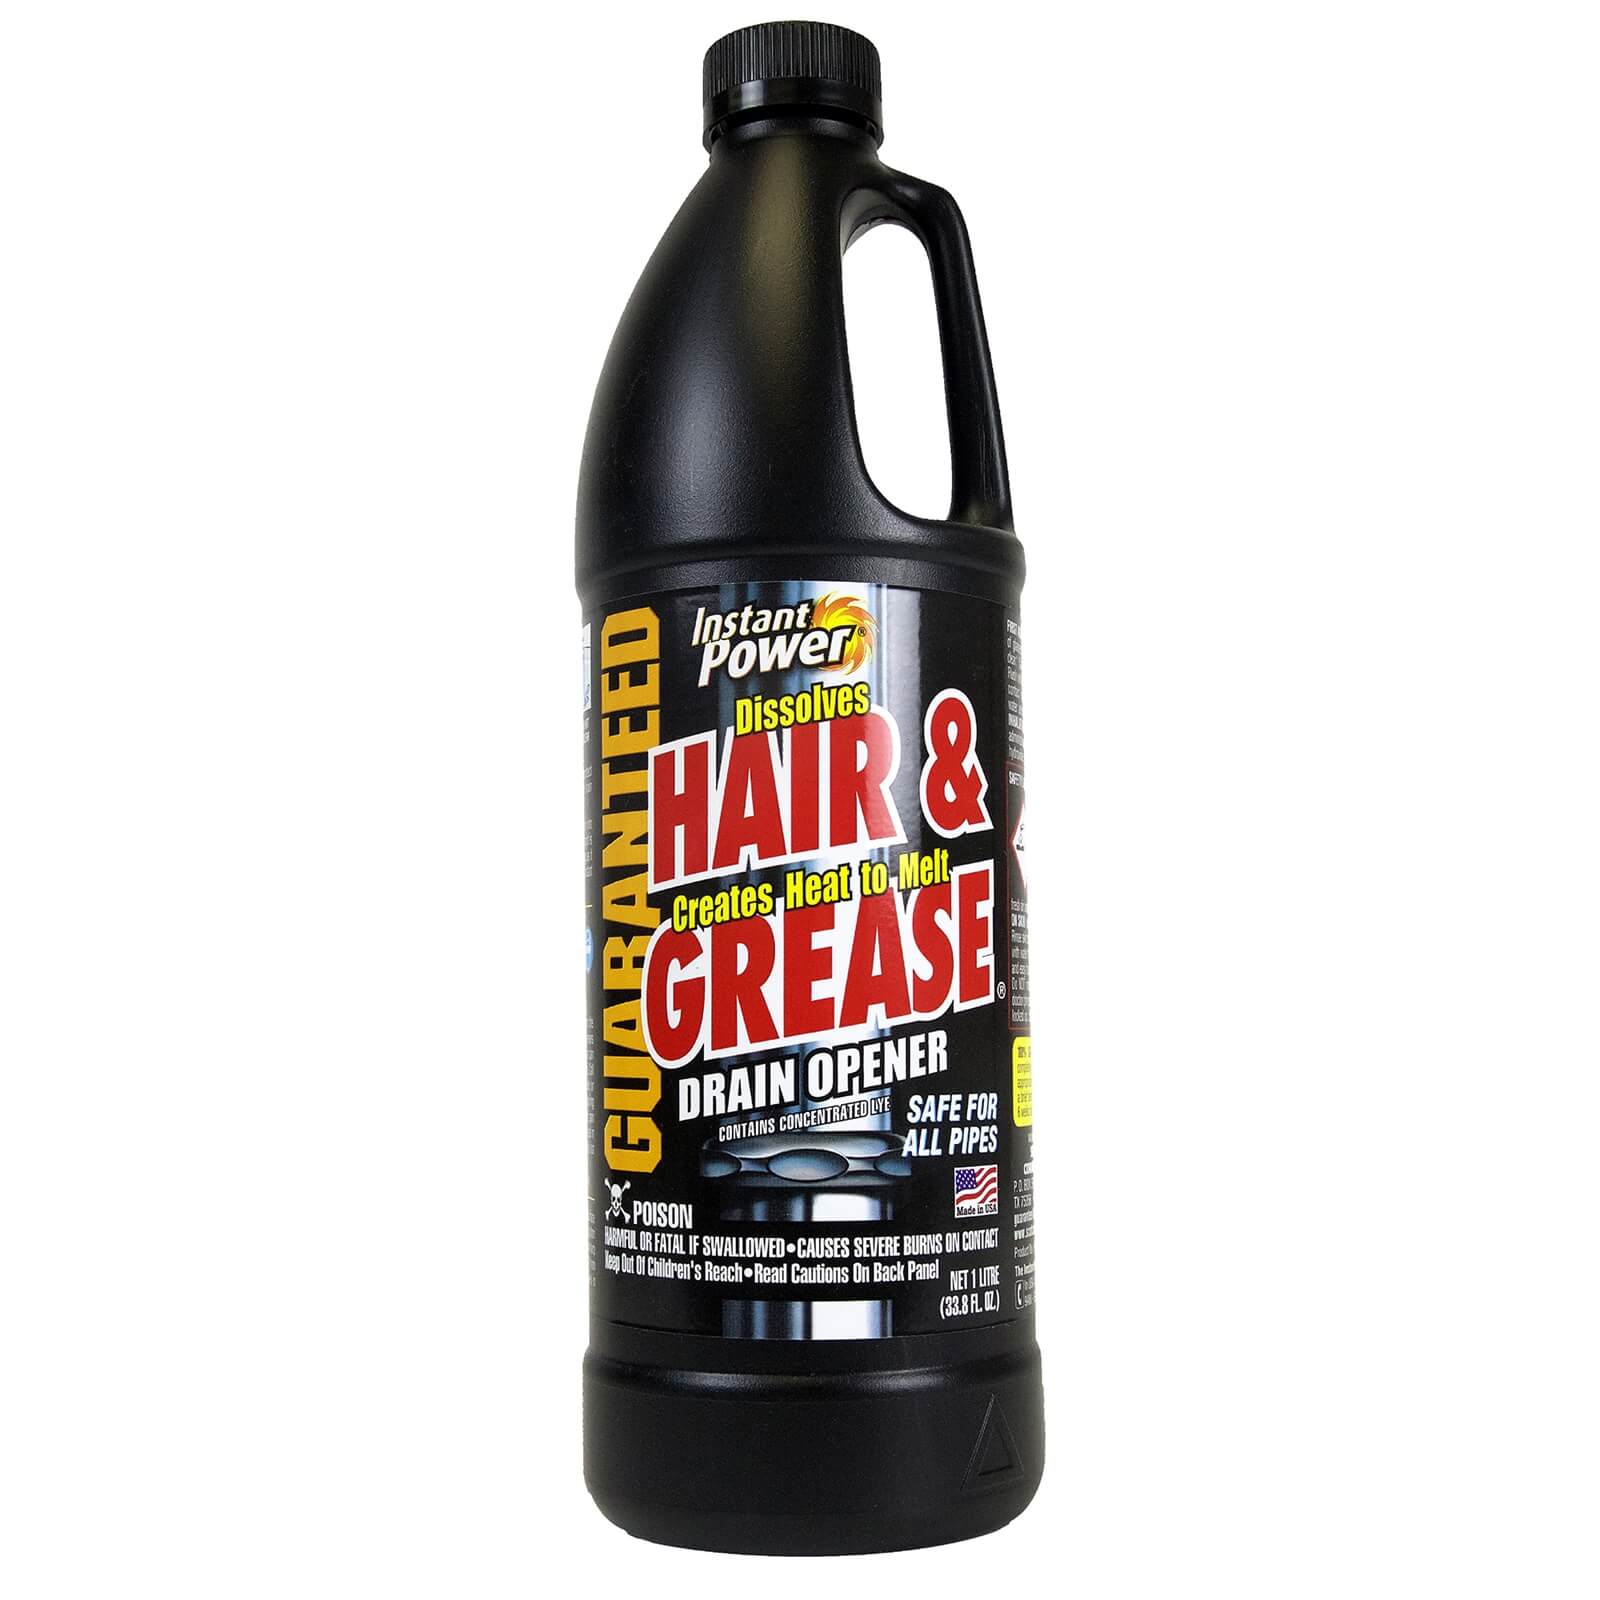 Instant Power Hair & Grease Drain Remover 1 Litre